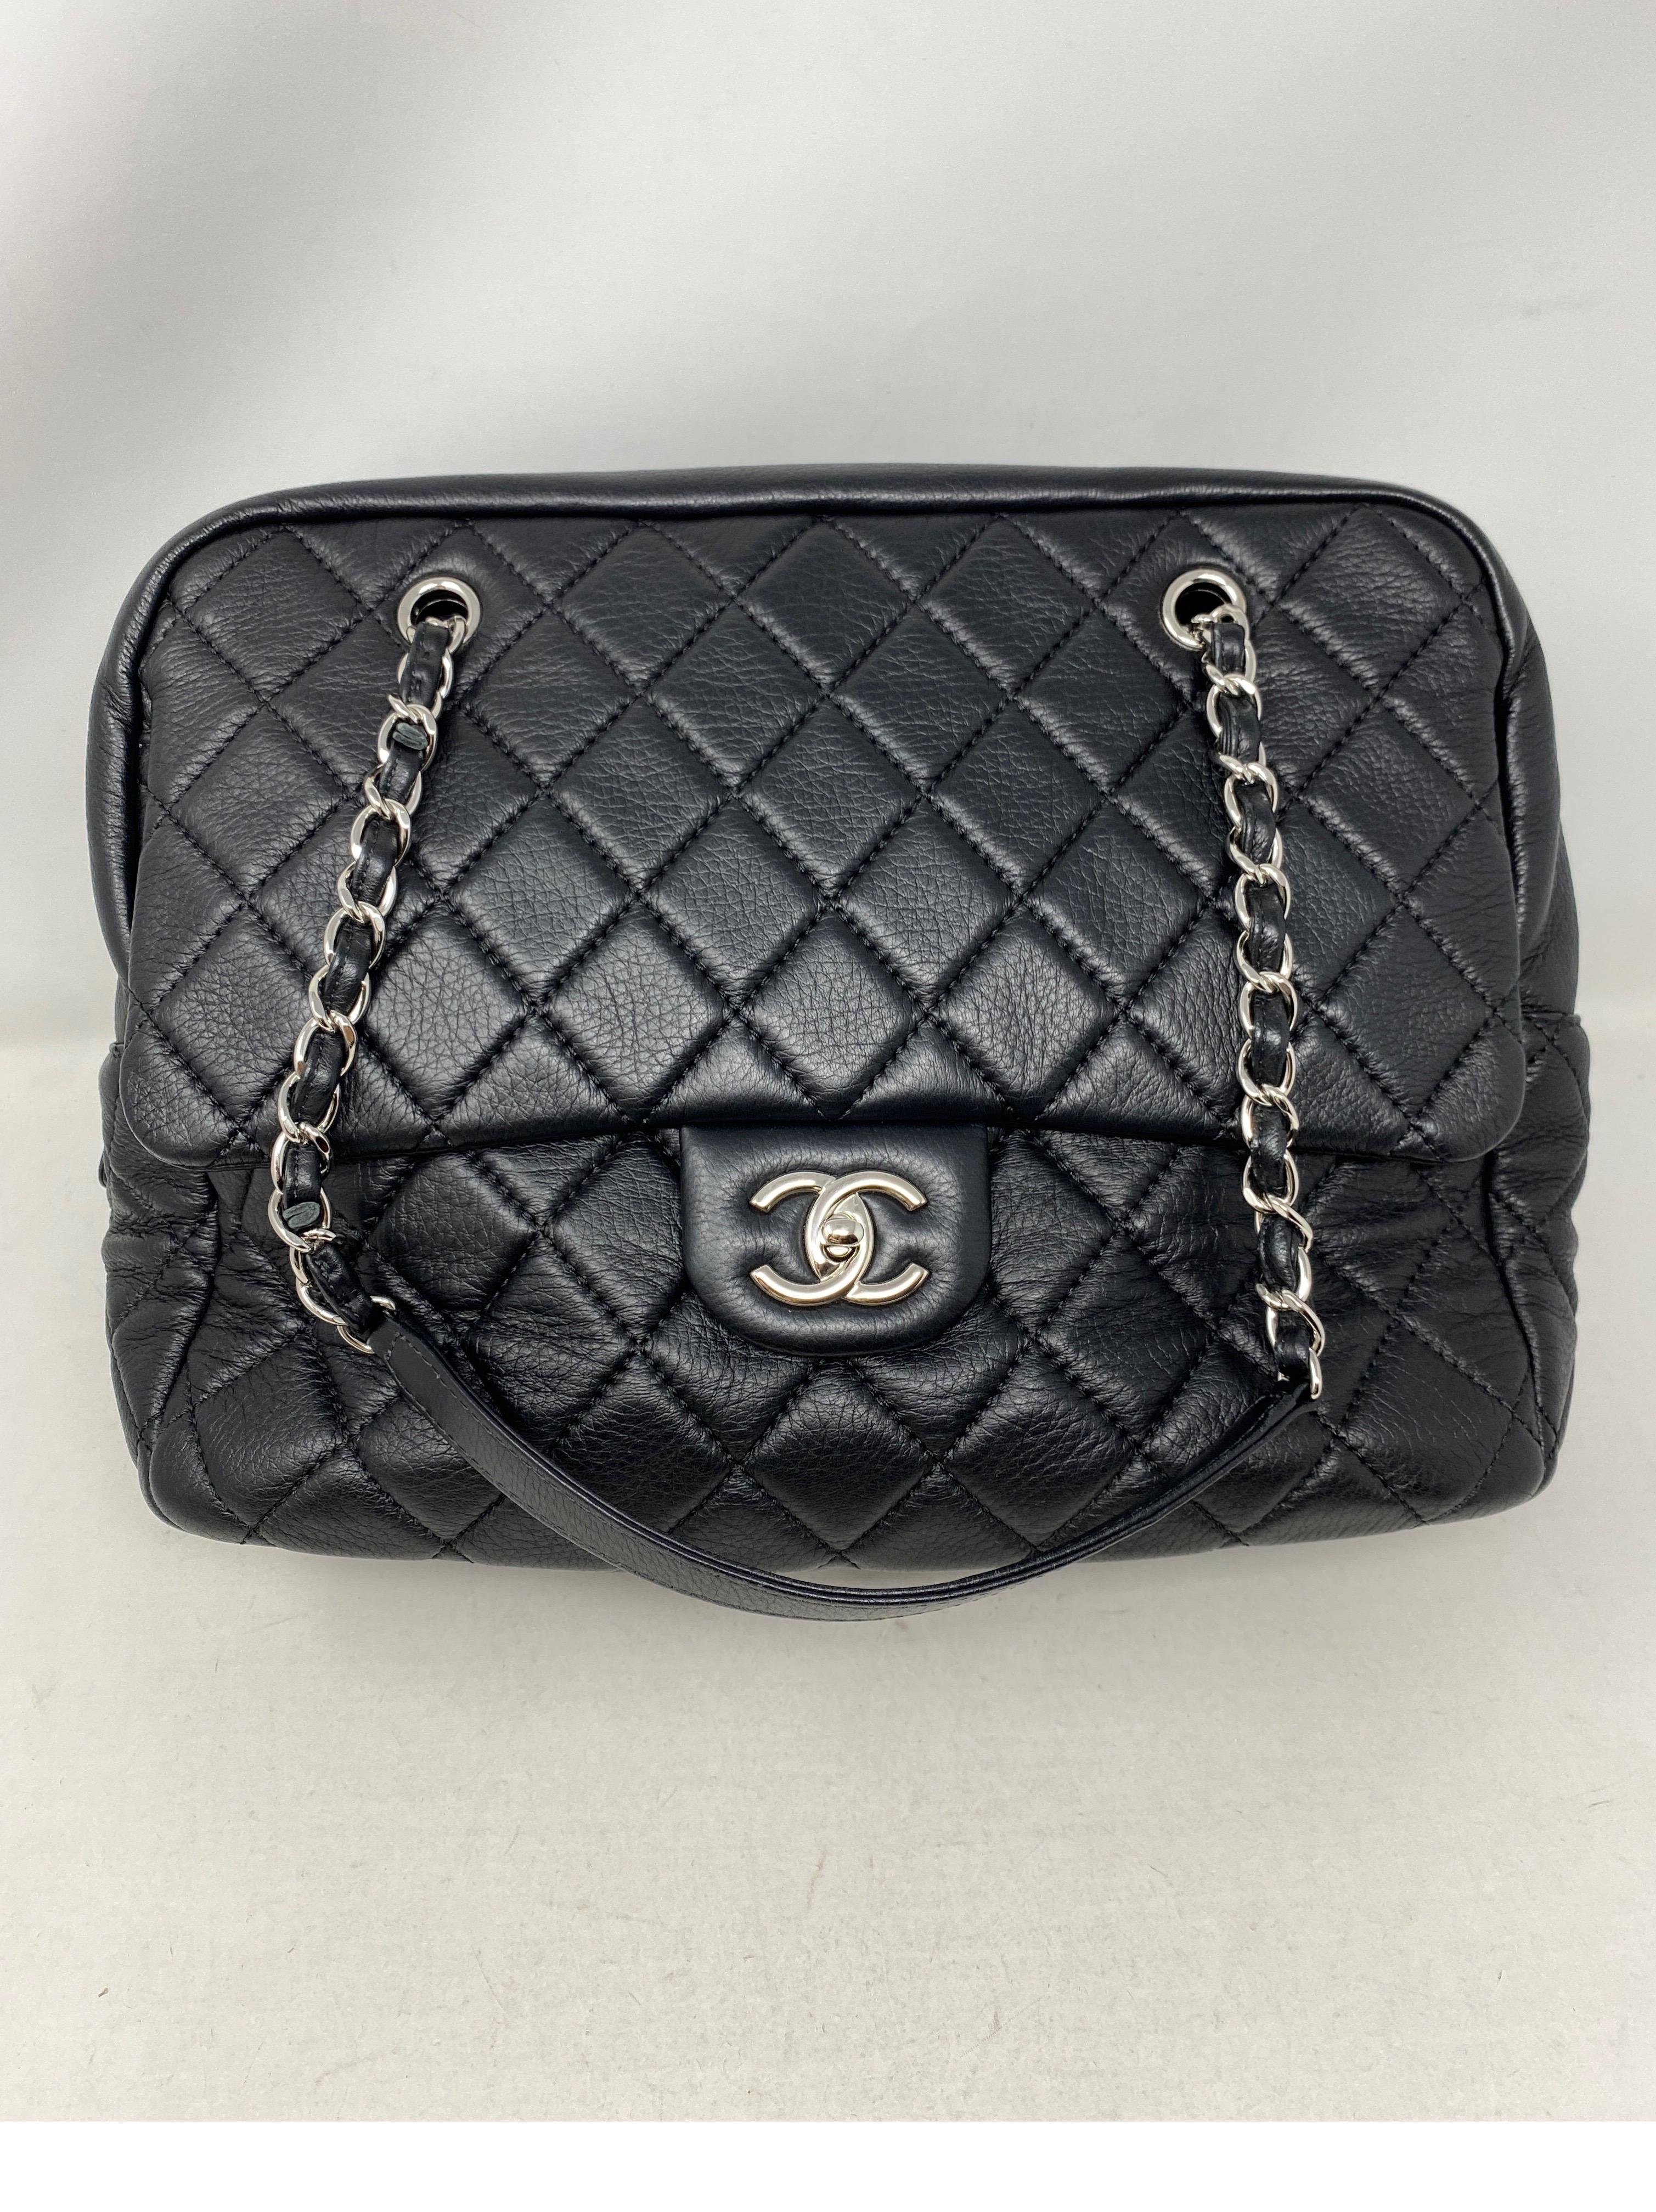 Chanel Black Bowler Tote Bag. Excellent like new condition. Silver hardware. Plenty of room to put your essentials or more in. Soft calfskin leather. Lighter bag. Great everyday bag. Includes authenticity card. Guaranteed authentic.